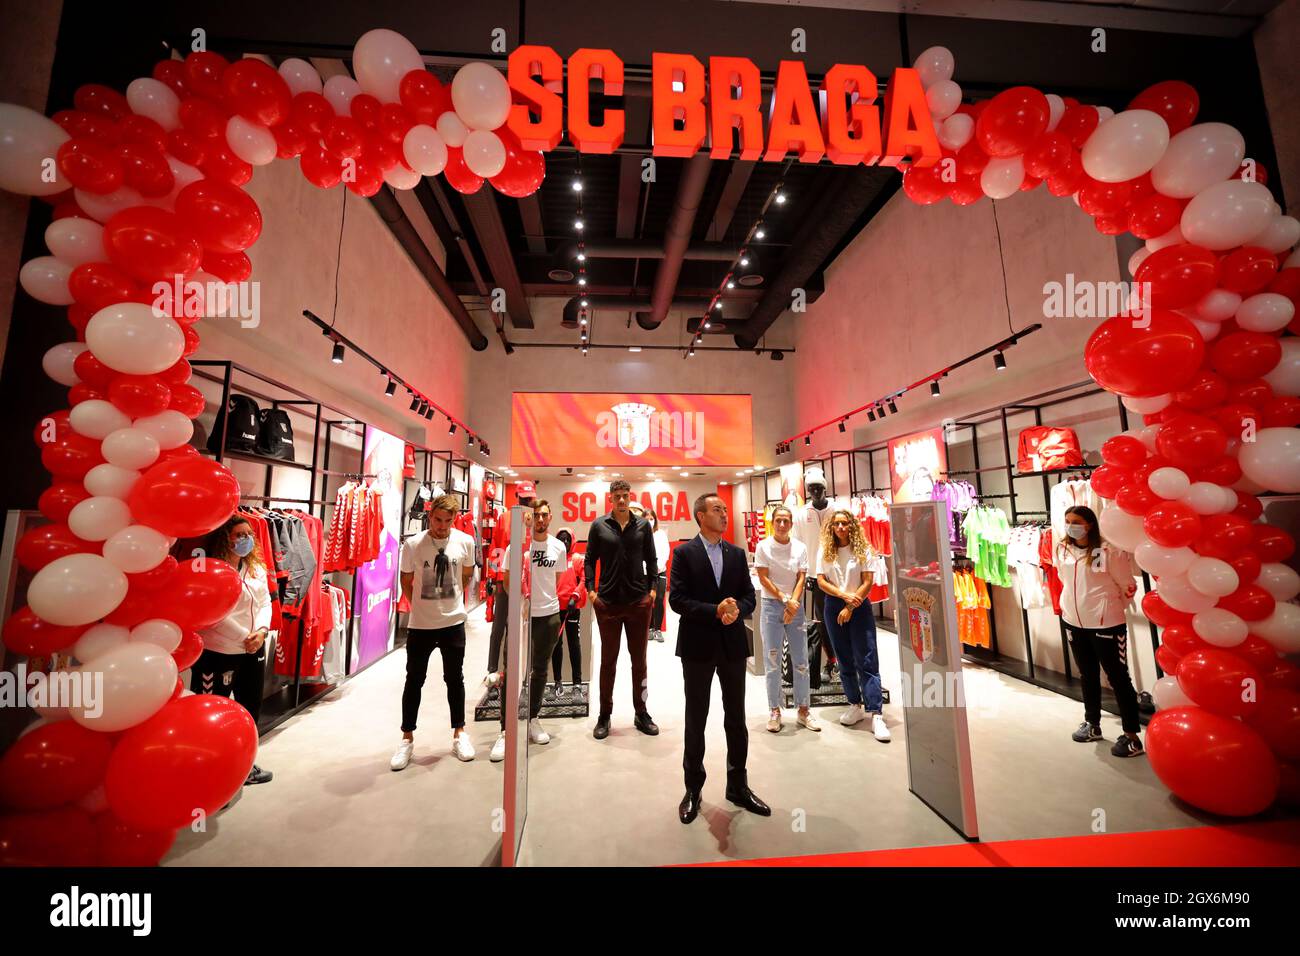 Braga, 10/04/2021 - The president of Sporting Clube de Braga and six  players this afternoon inaugurated the club's new store in the Braga Parque  shopping centre. New SC Braga store in Braga